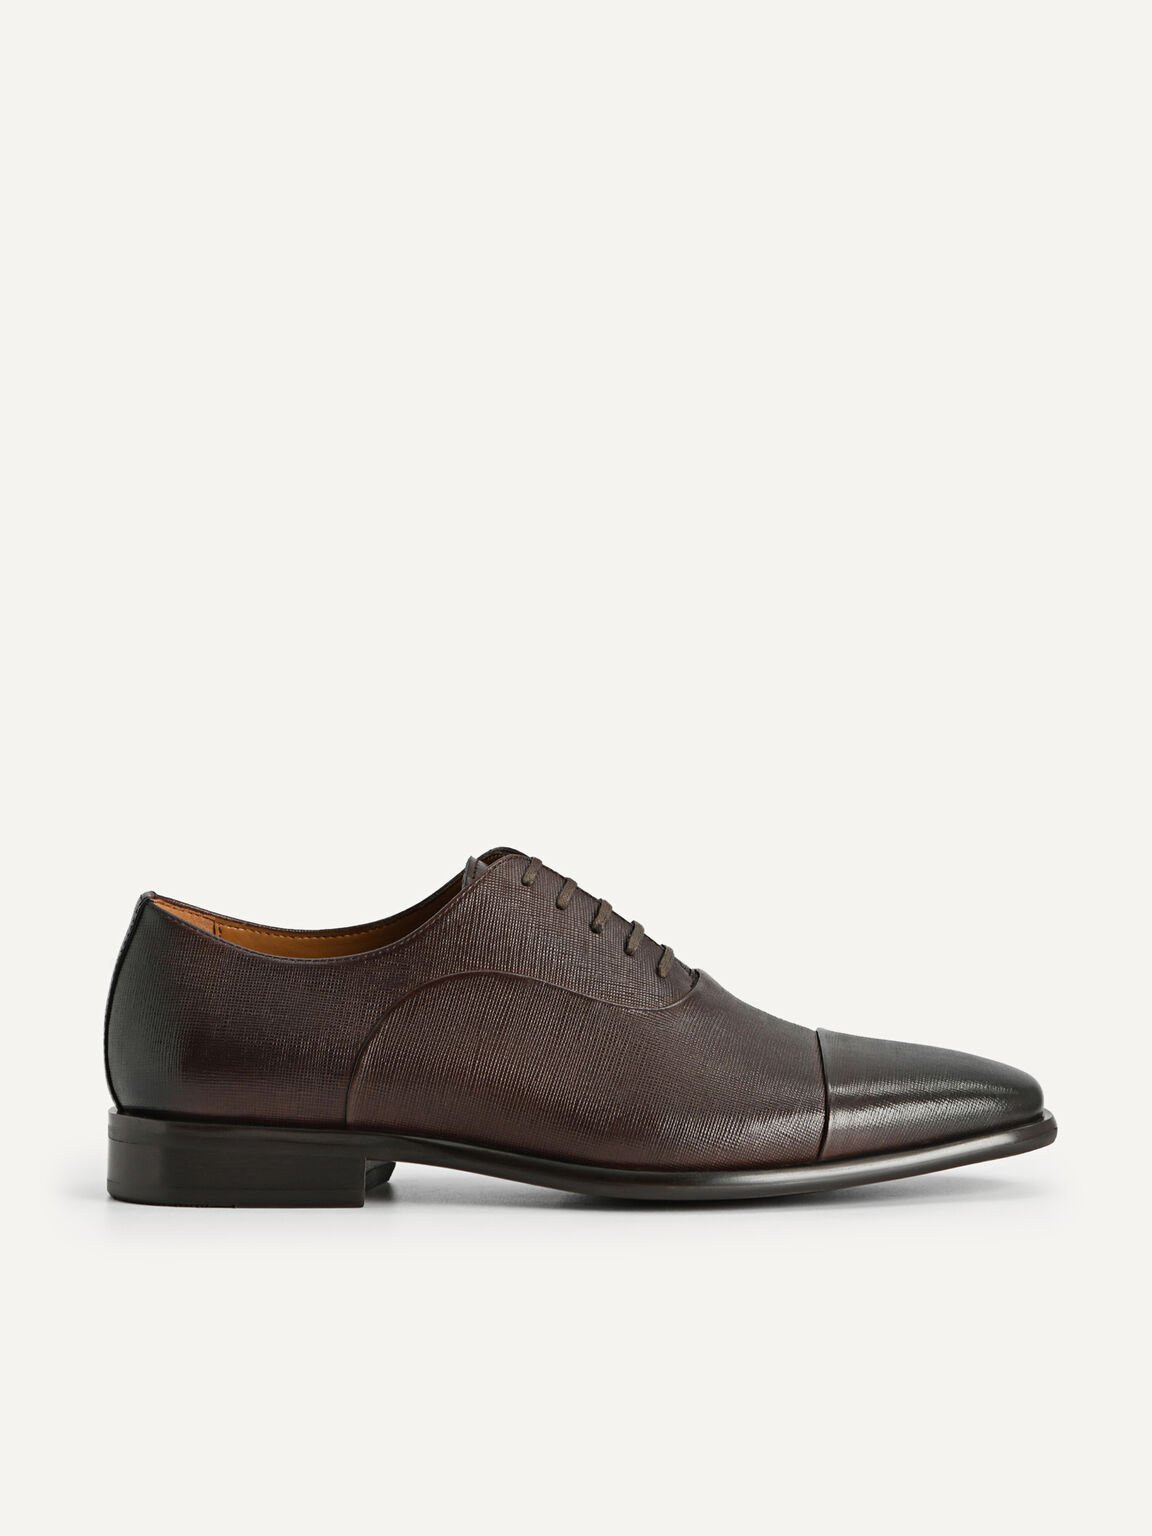 Textured Leather Oxford Shoes, Brown